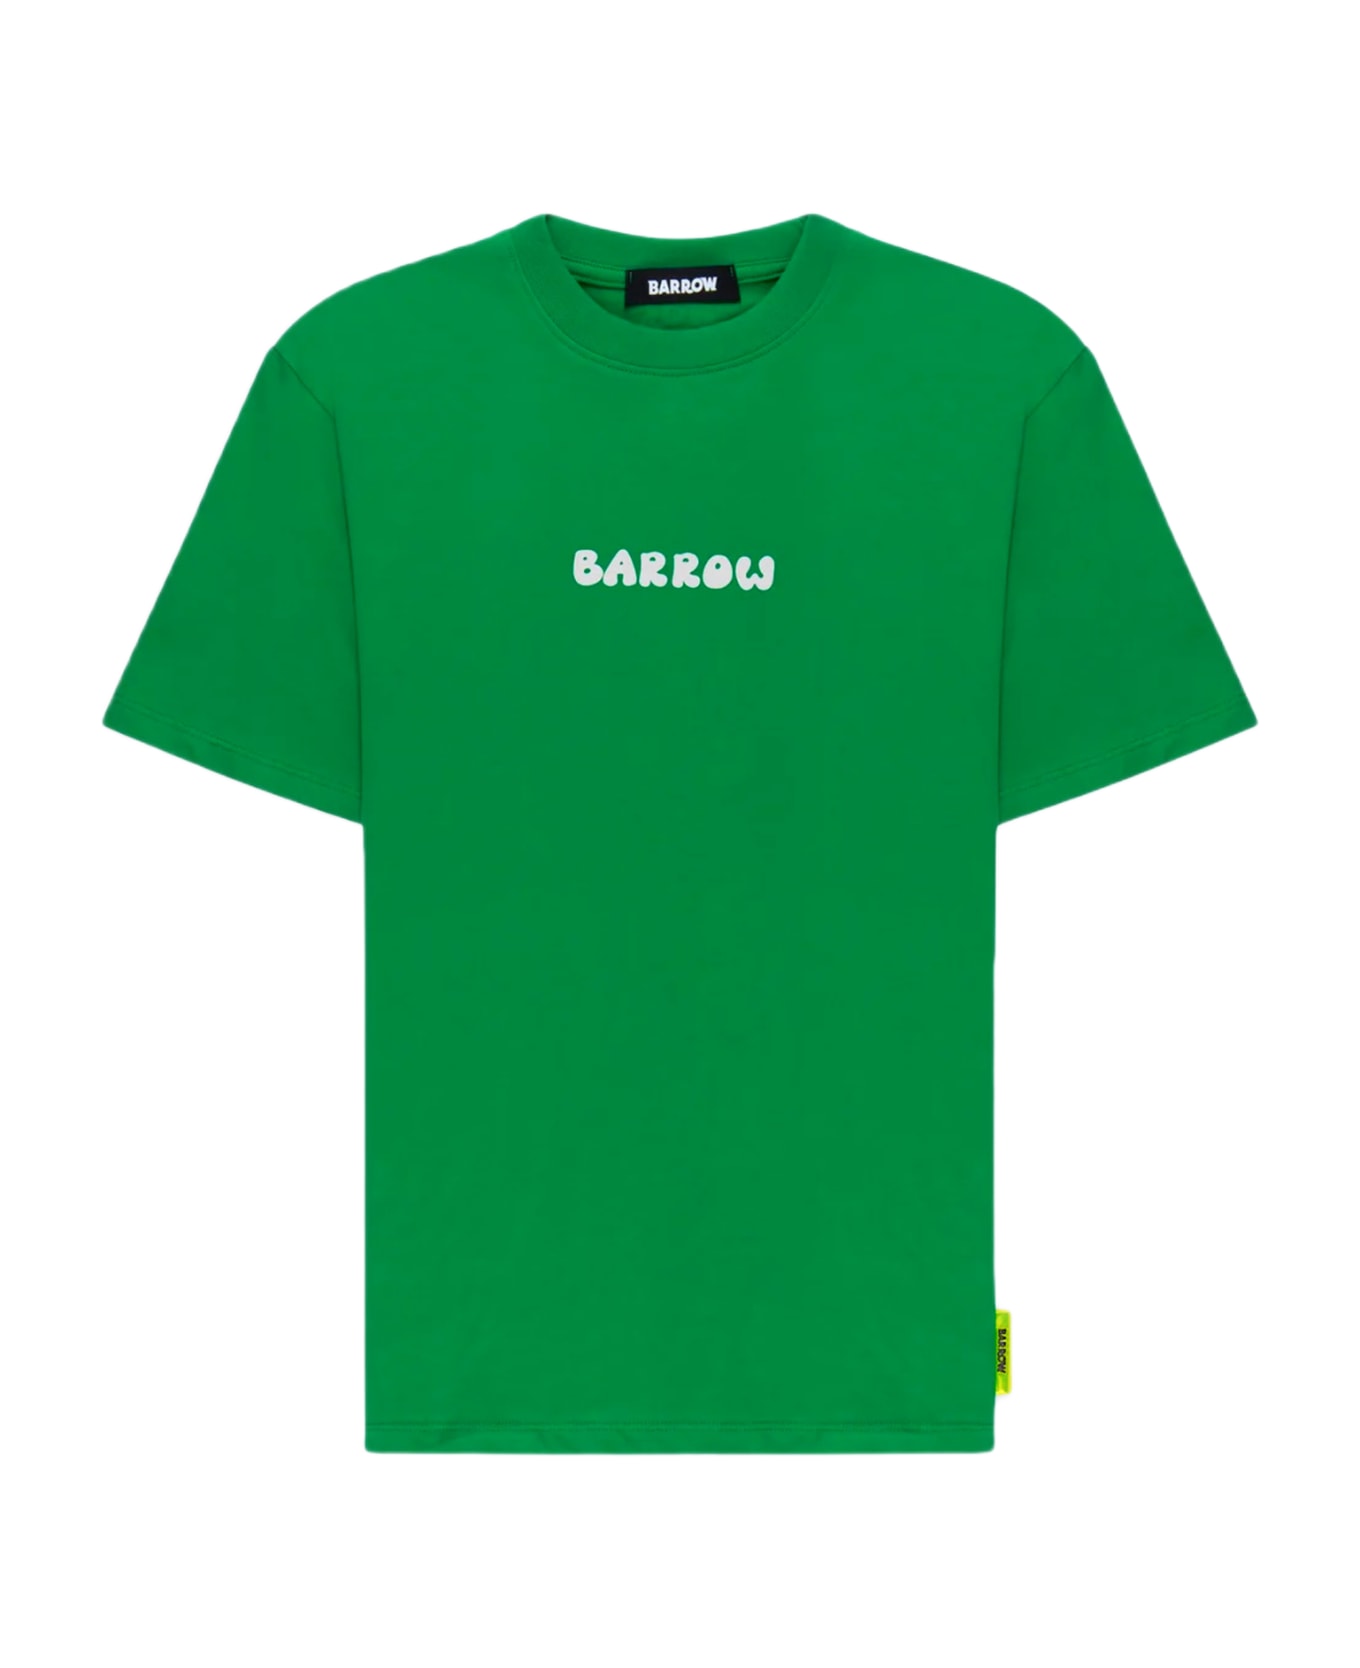 Barrow Jersey T-shirt Unisex Emerald green t-shirt with front logo and back graphic print - Verde シャツ